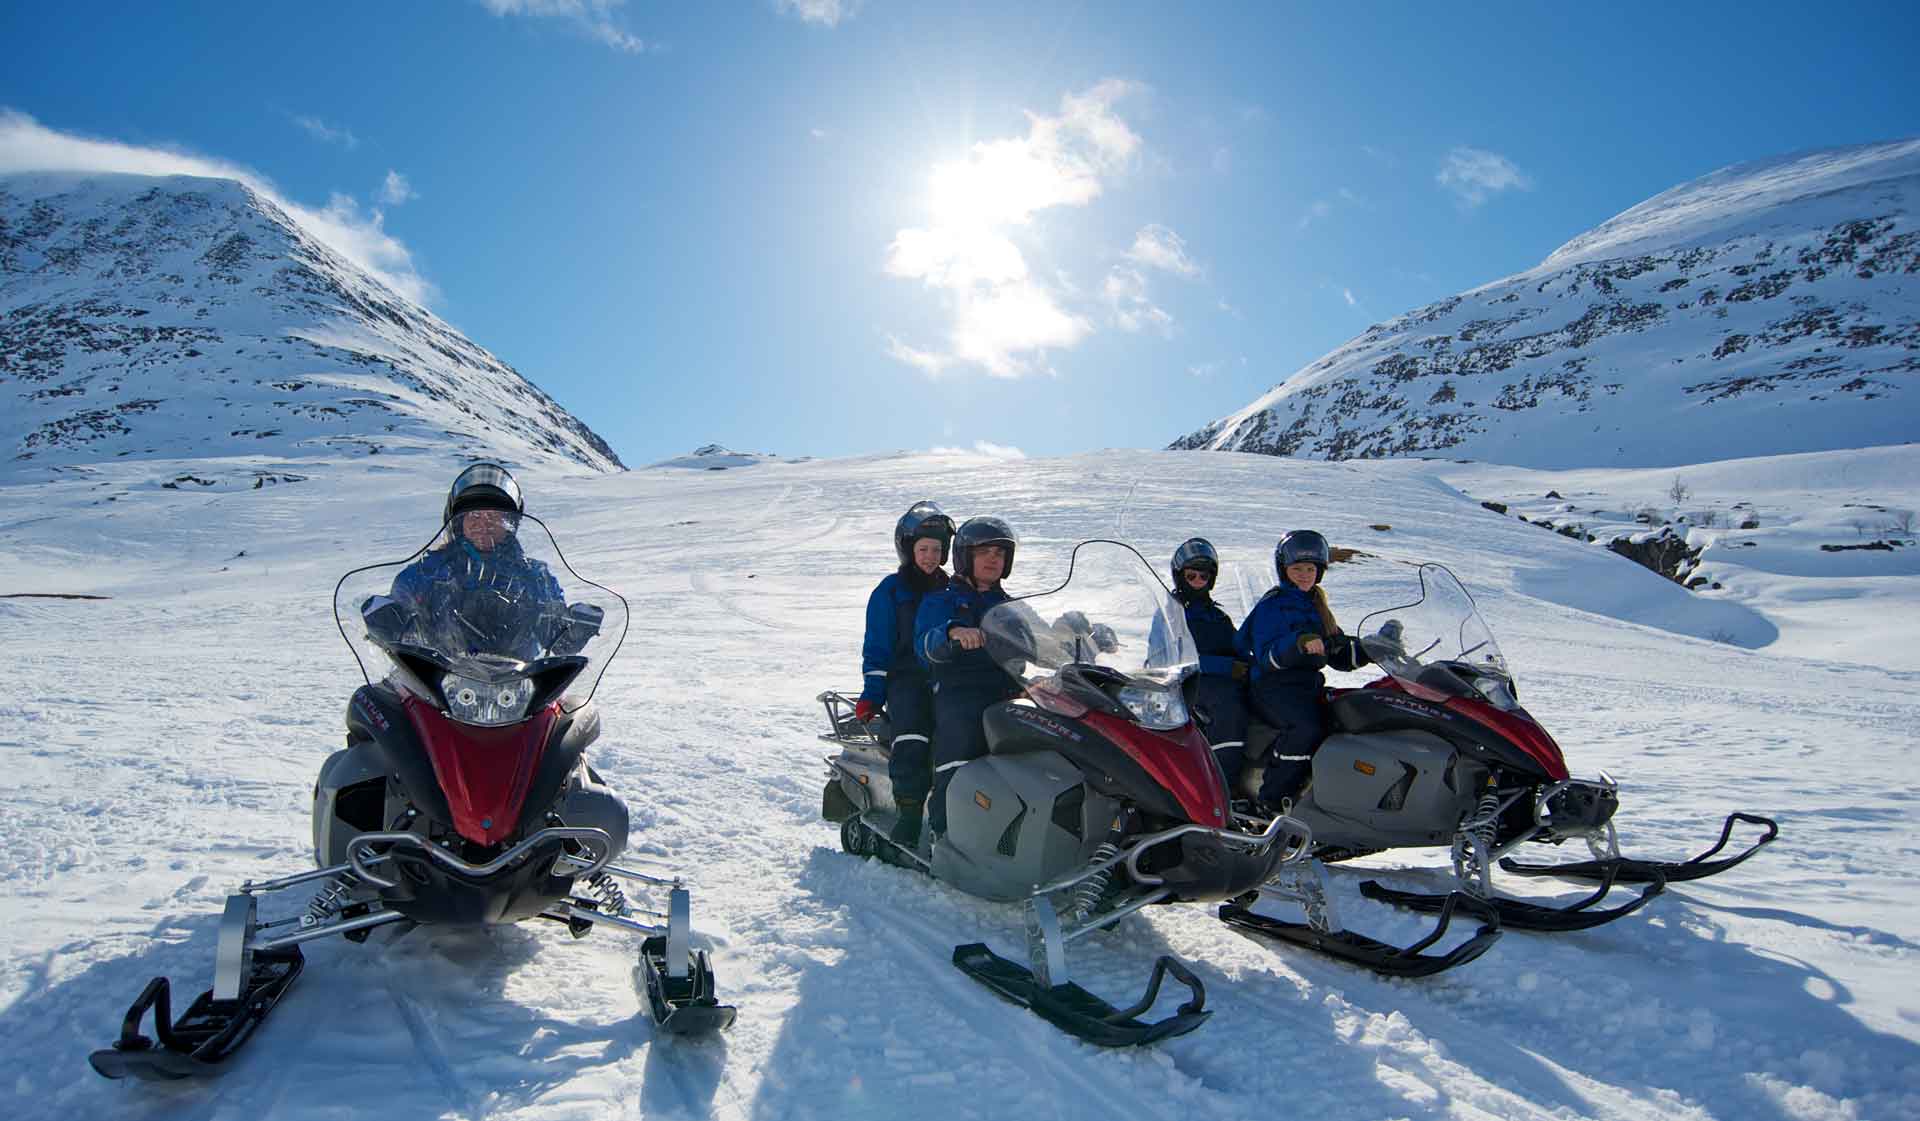 Photo. Group of parked snowmobiles